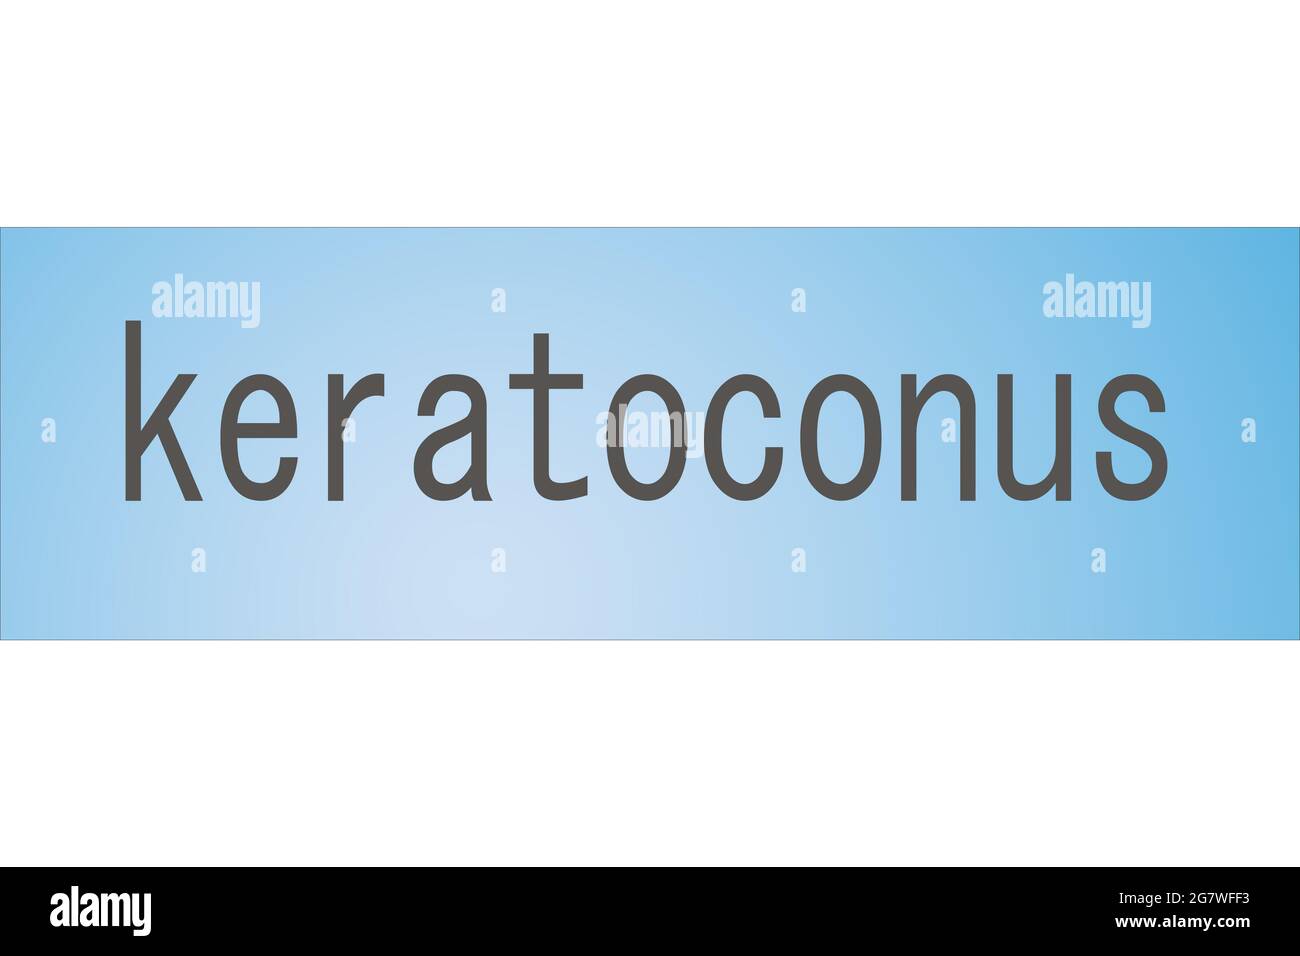 keratoconus lettering word, diagnosis of corneal dystrophy illustration. Stock Photo